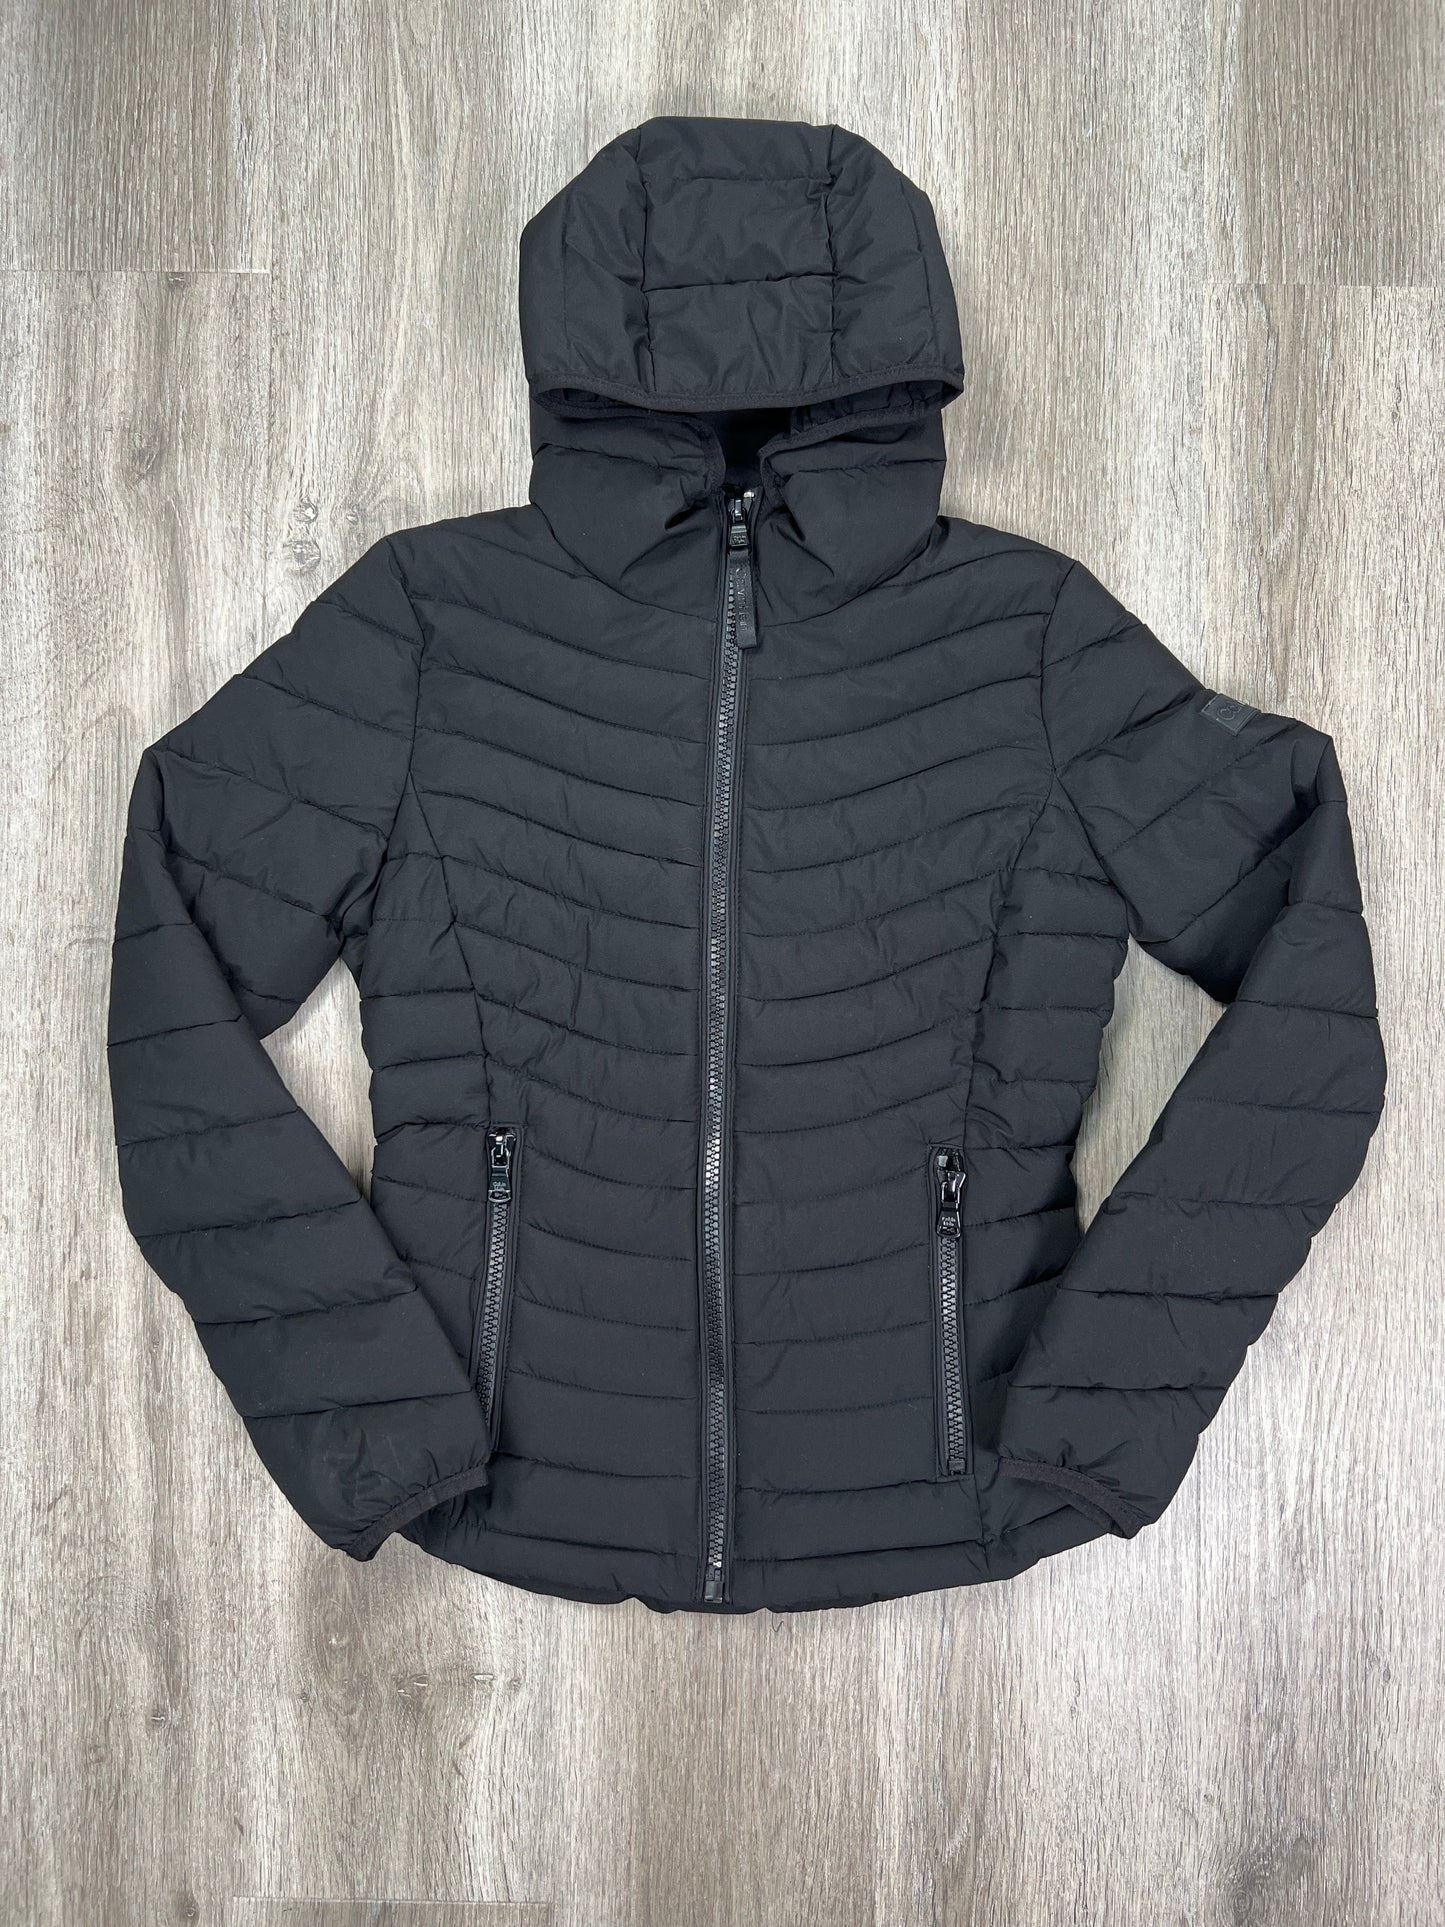 Black Jacket Puffer & Quilted Calvin Klein, Size Xs